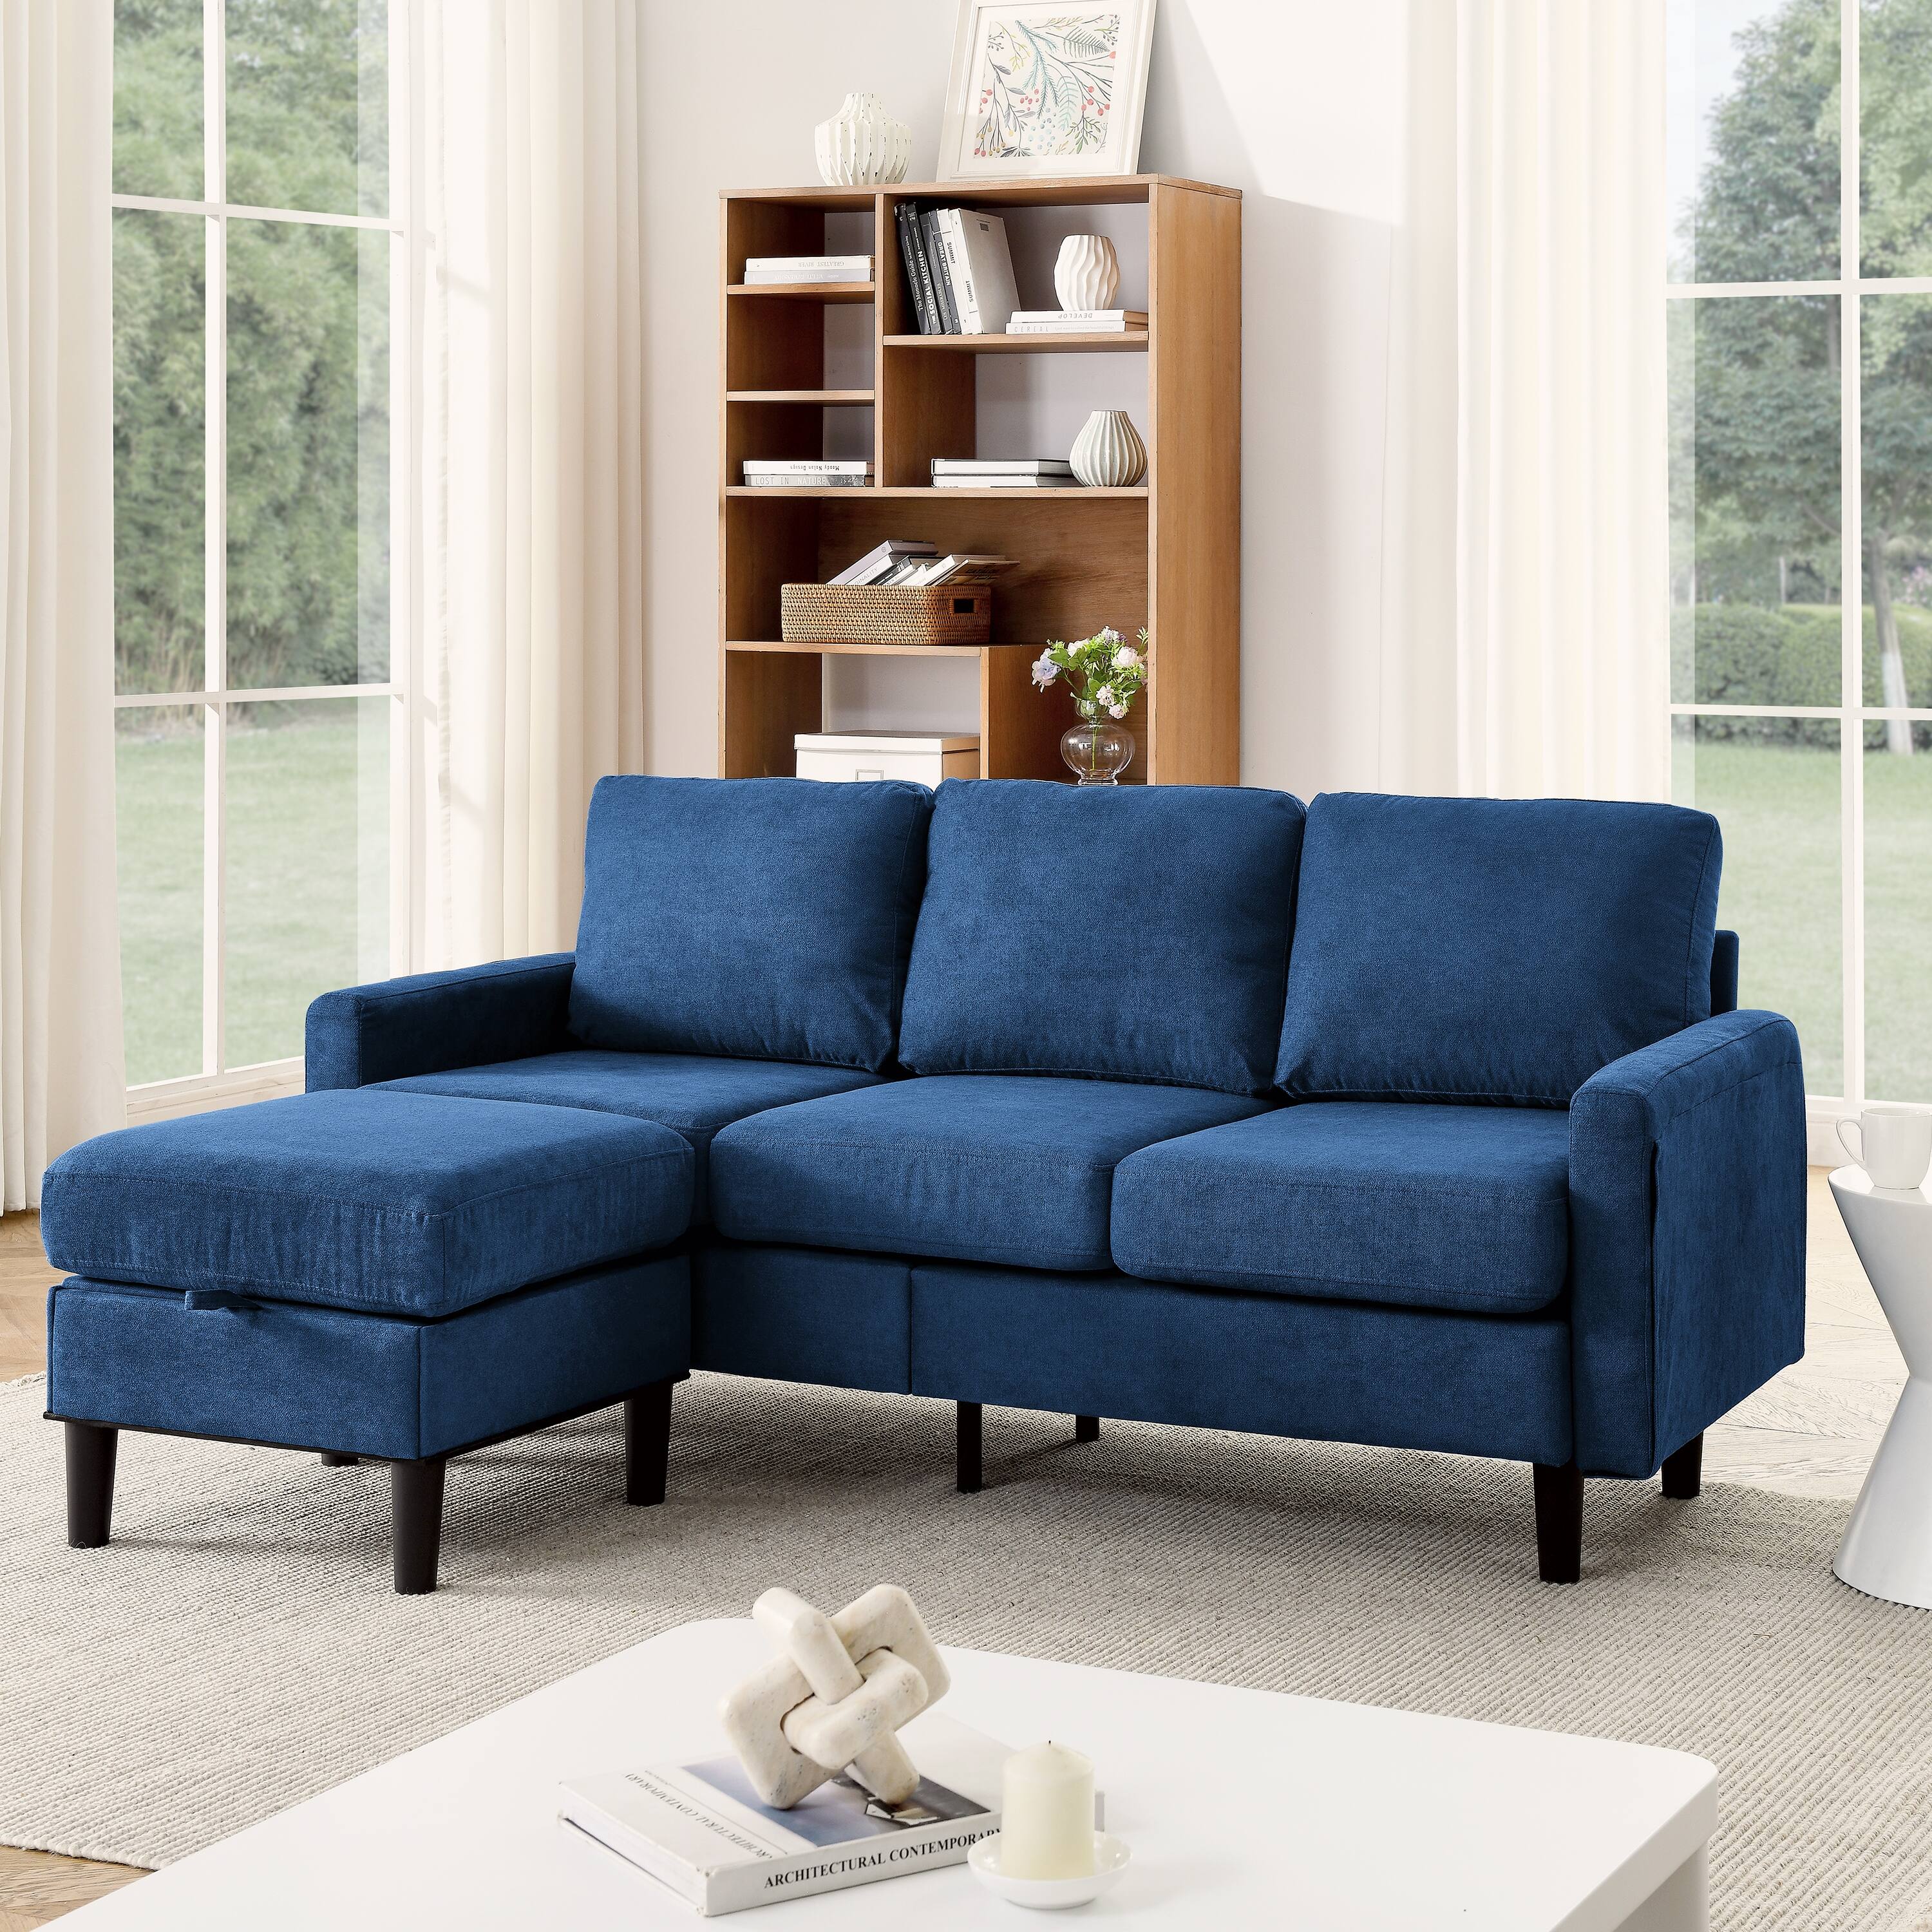 Convertible Sectional Sofa L-Shaped Sofa with Storage Ottoman, 3 Seat ...